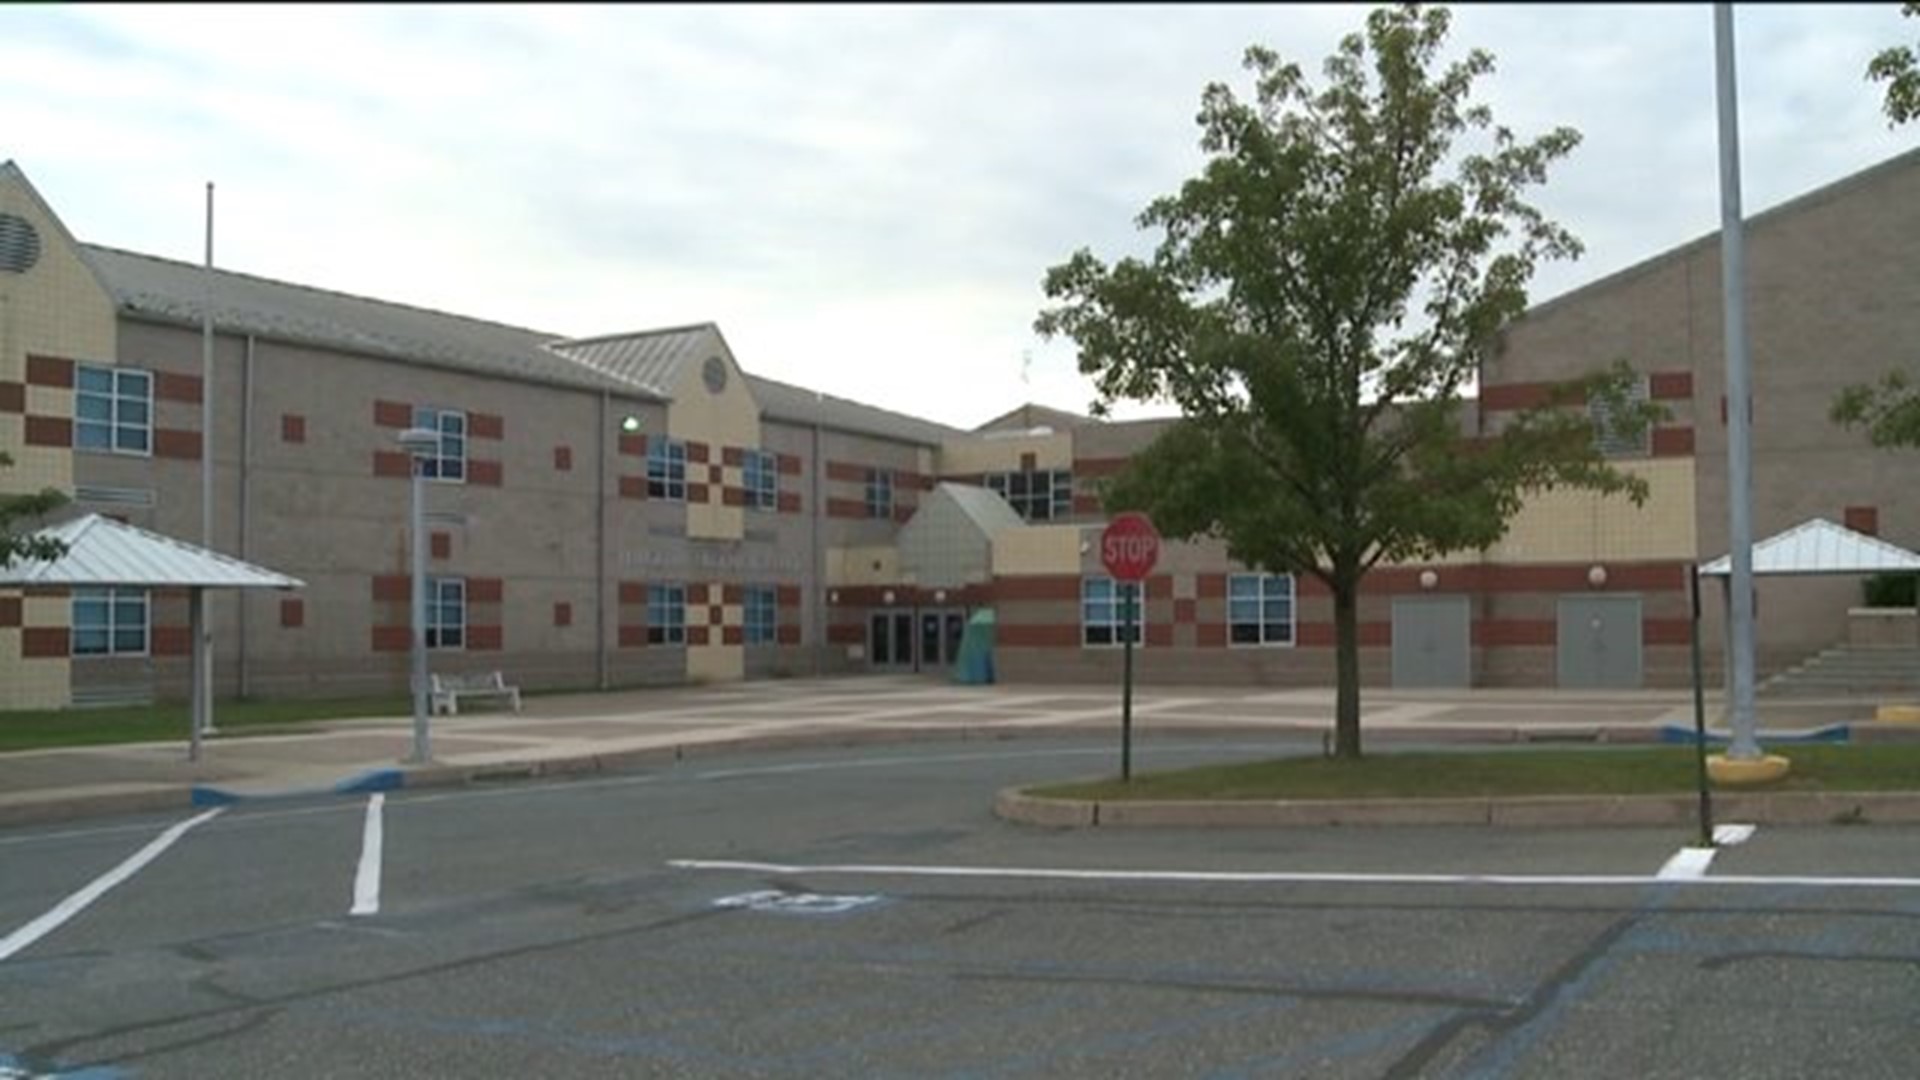 Former Teacher Charged with Sending Inappropriate Texts to Student